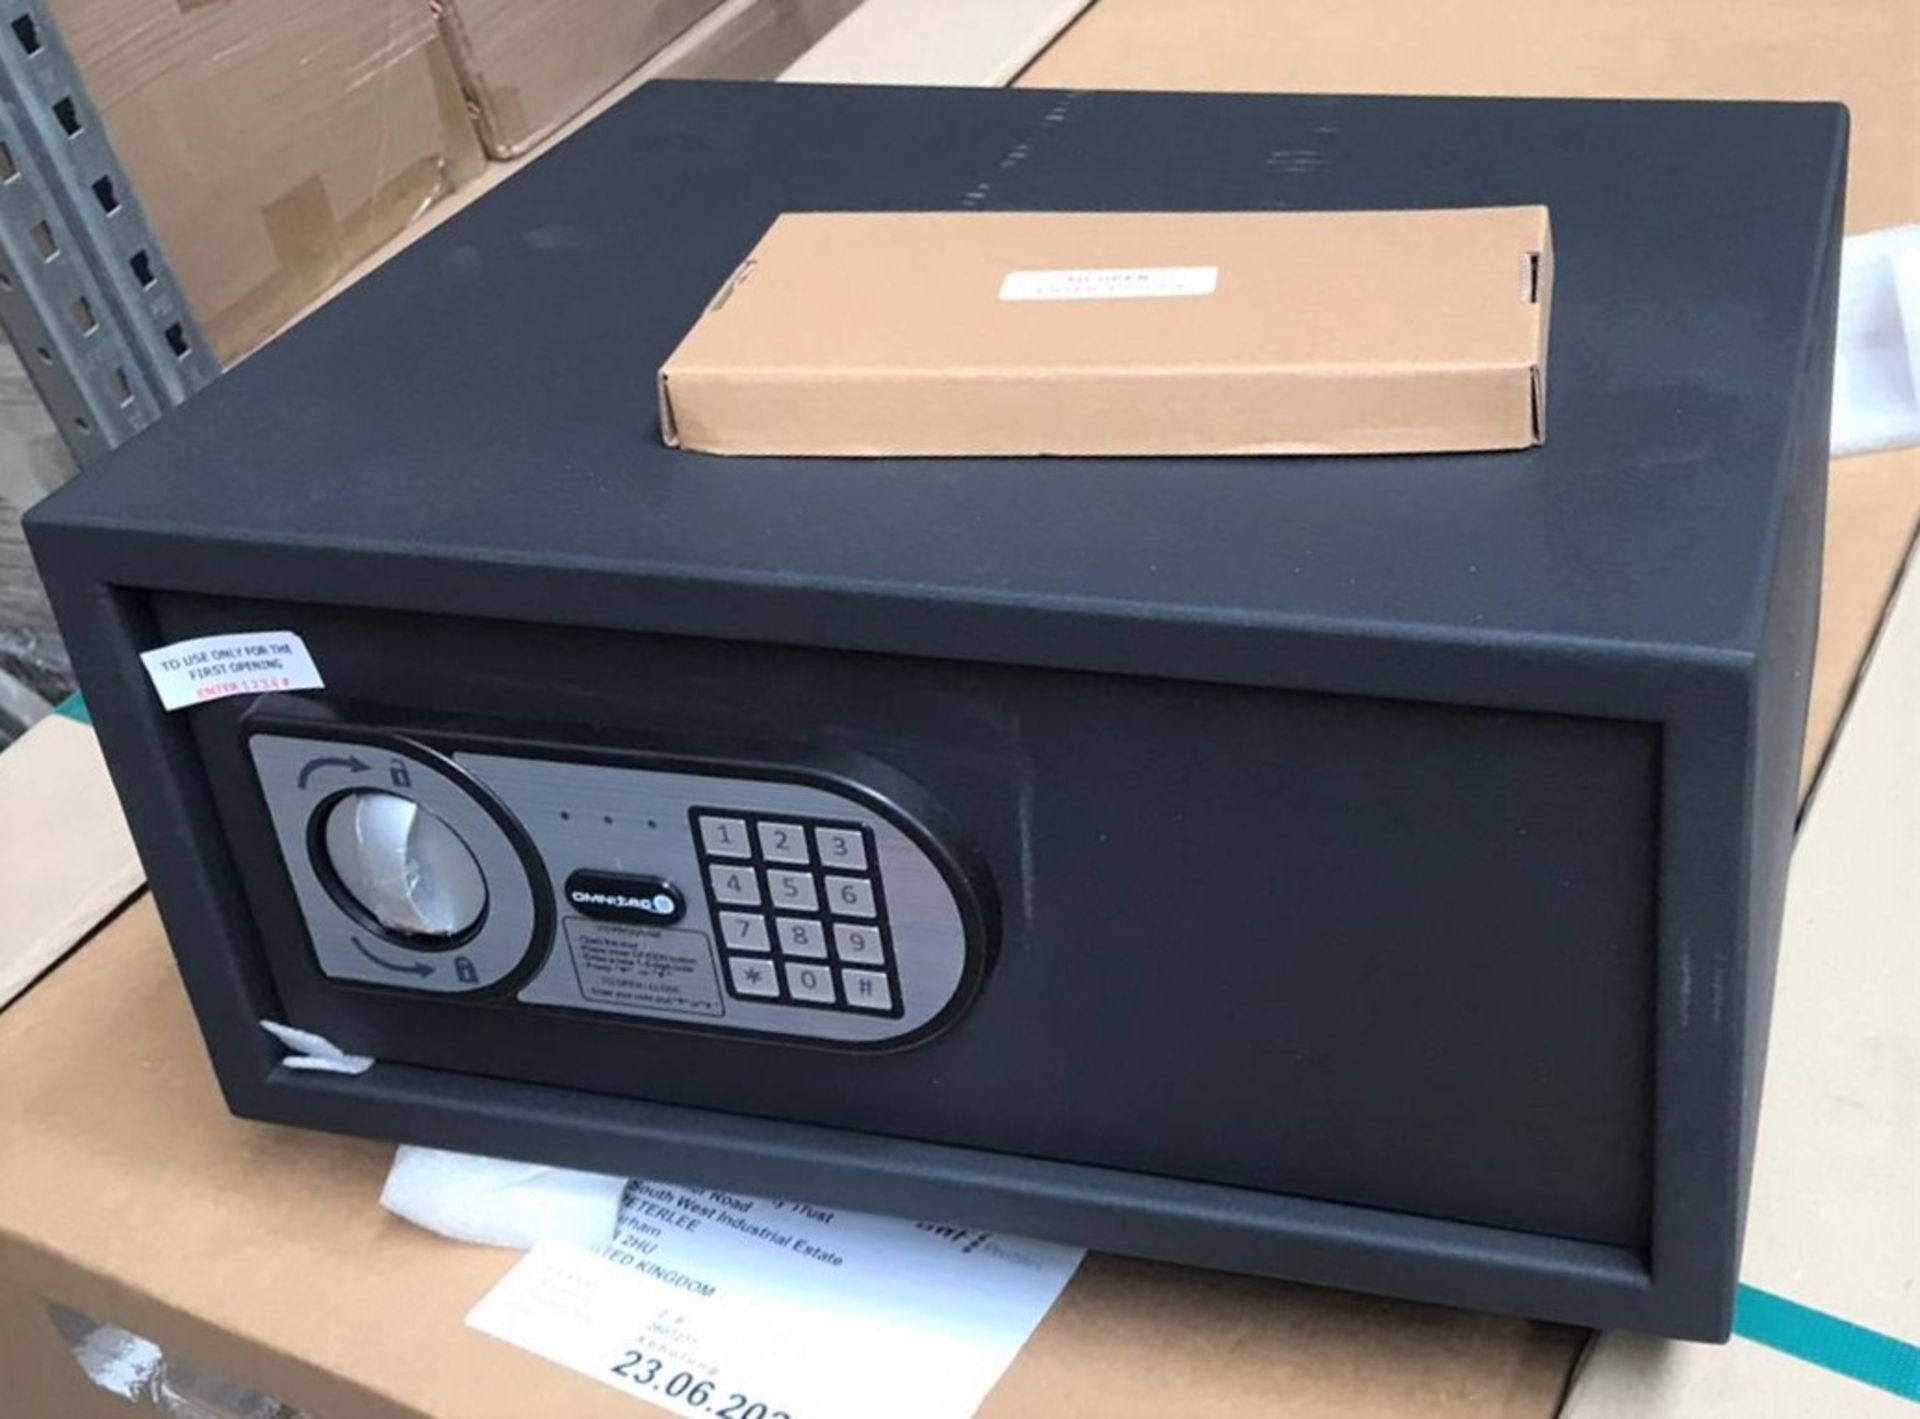 4 x Omnitec Safeguard Security Safes With Keypad Opening - Model Laptop 15 - Size H20 x W43 x D35 - Image 5 of 7